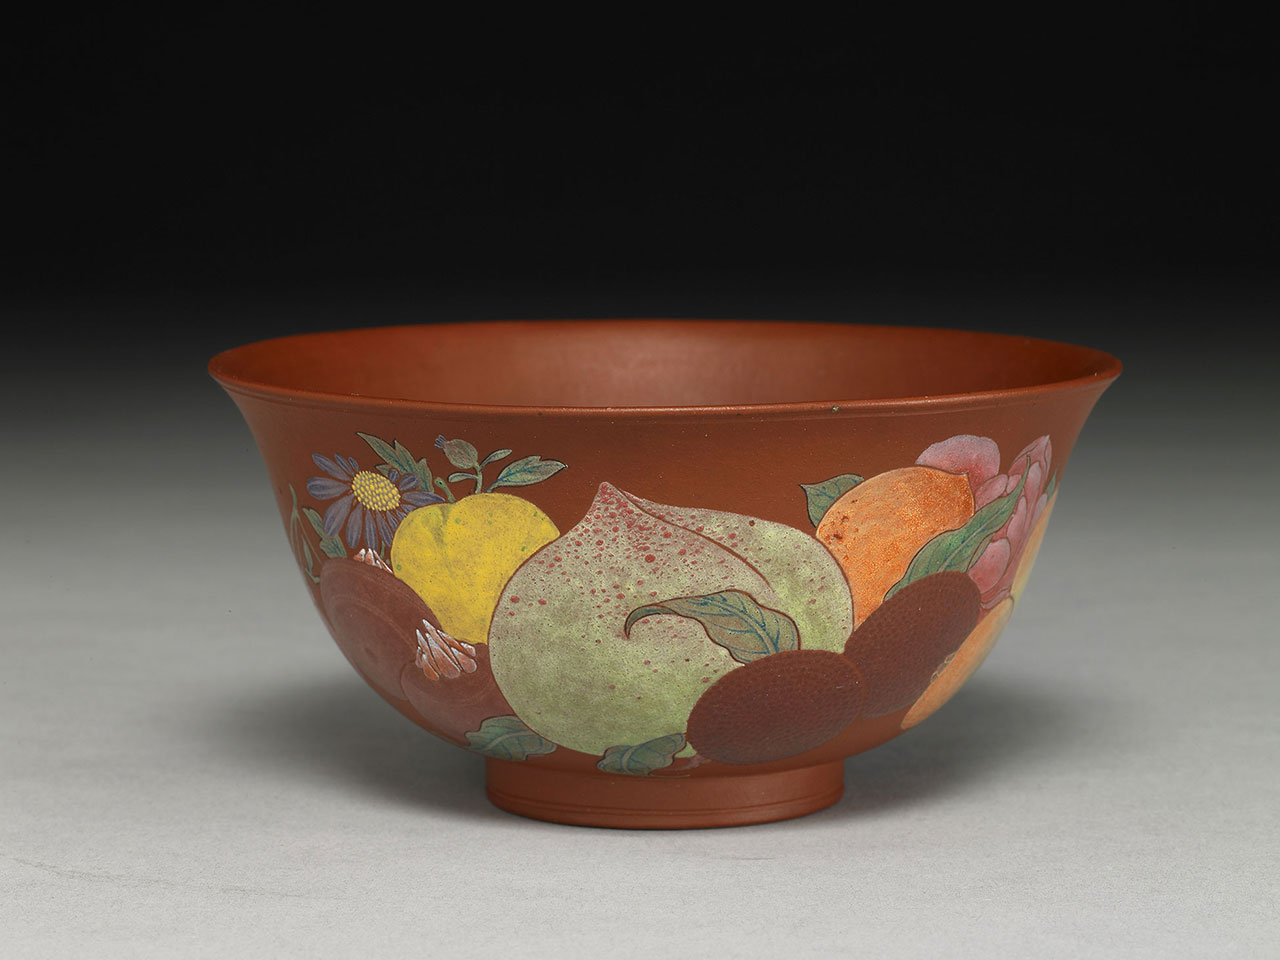 Yixing bowl with flowers and fruits in painted enamels